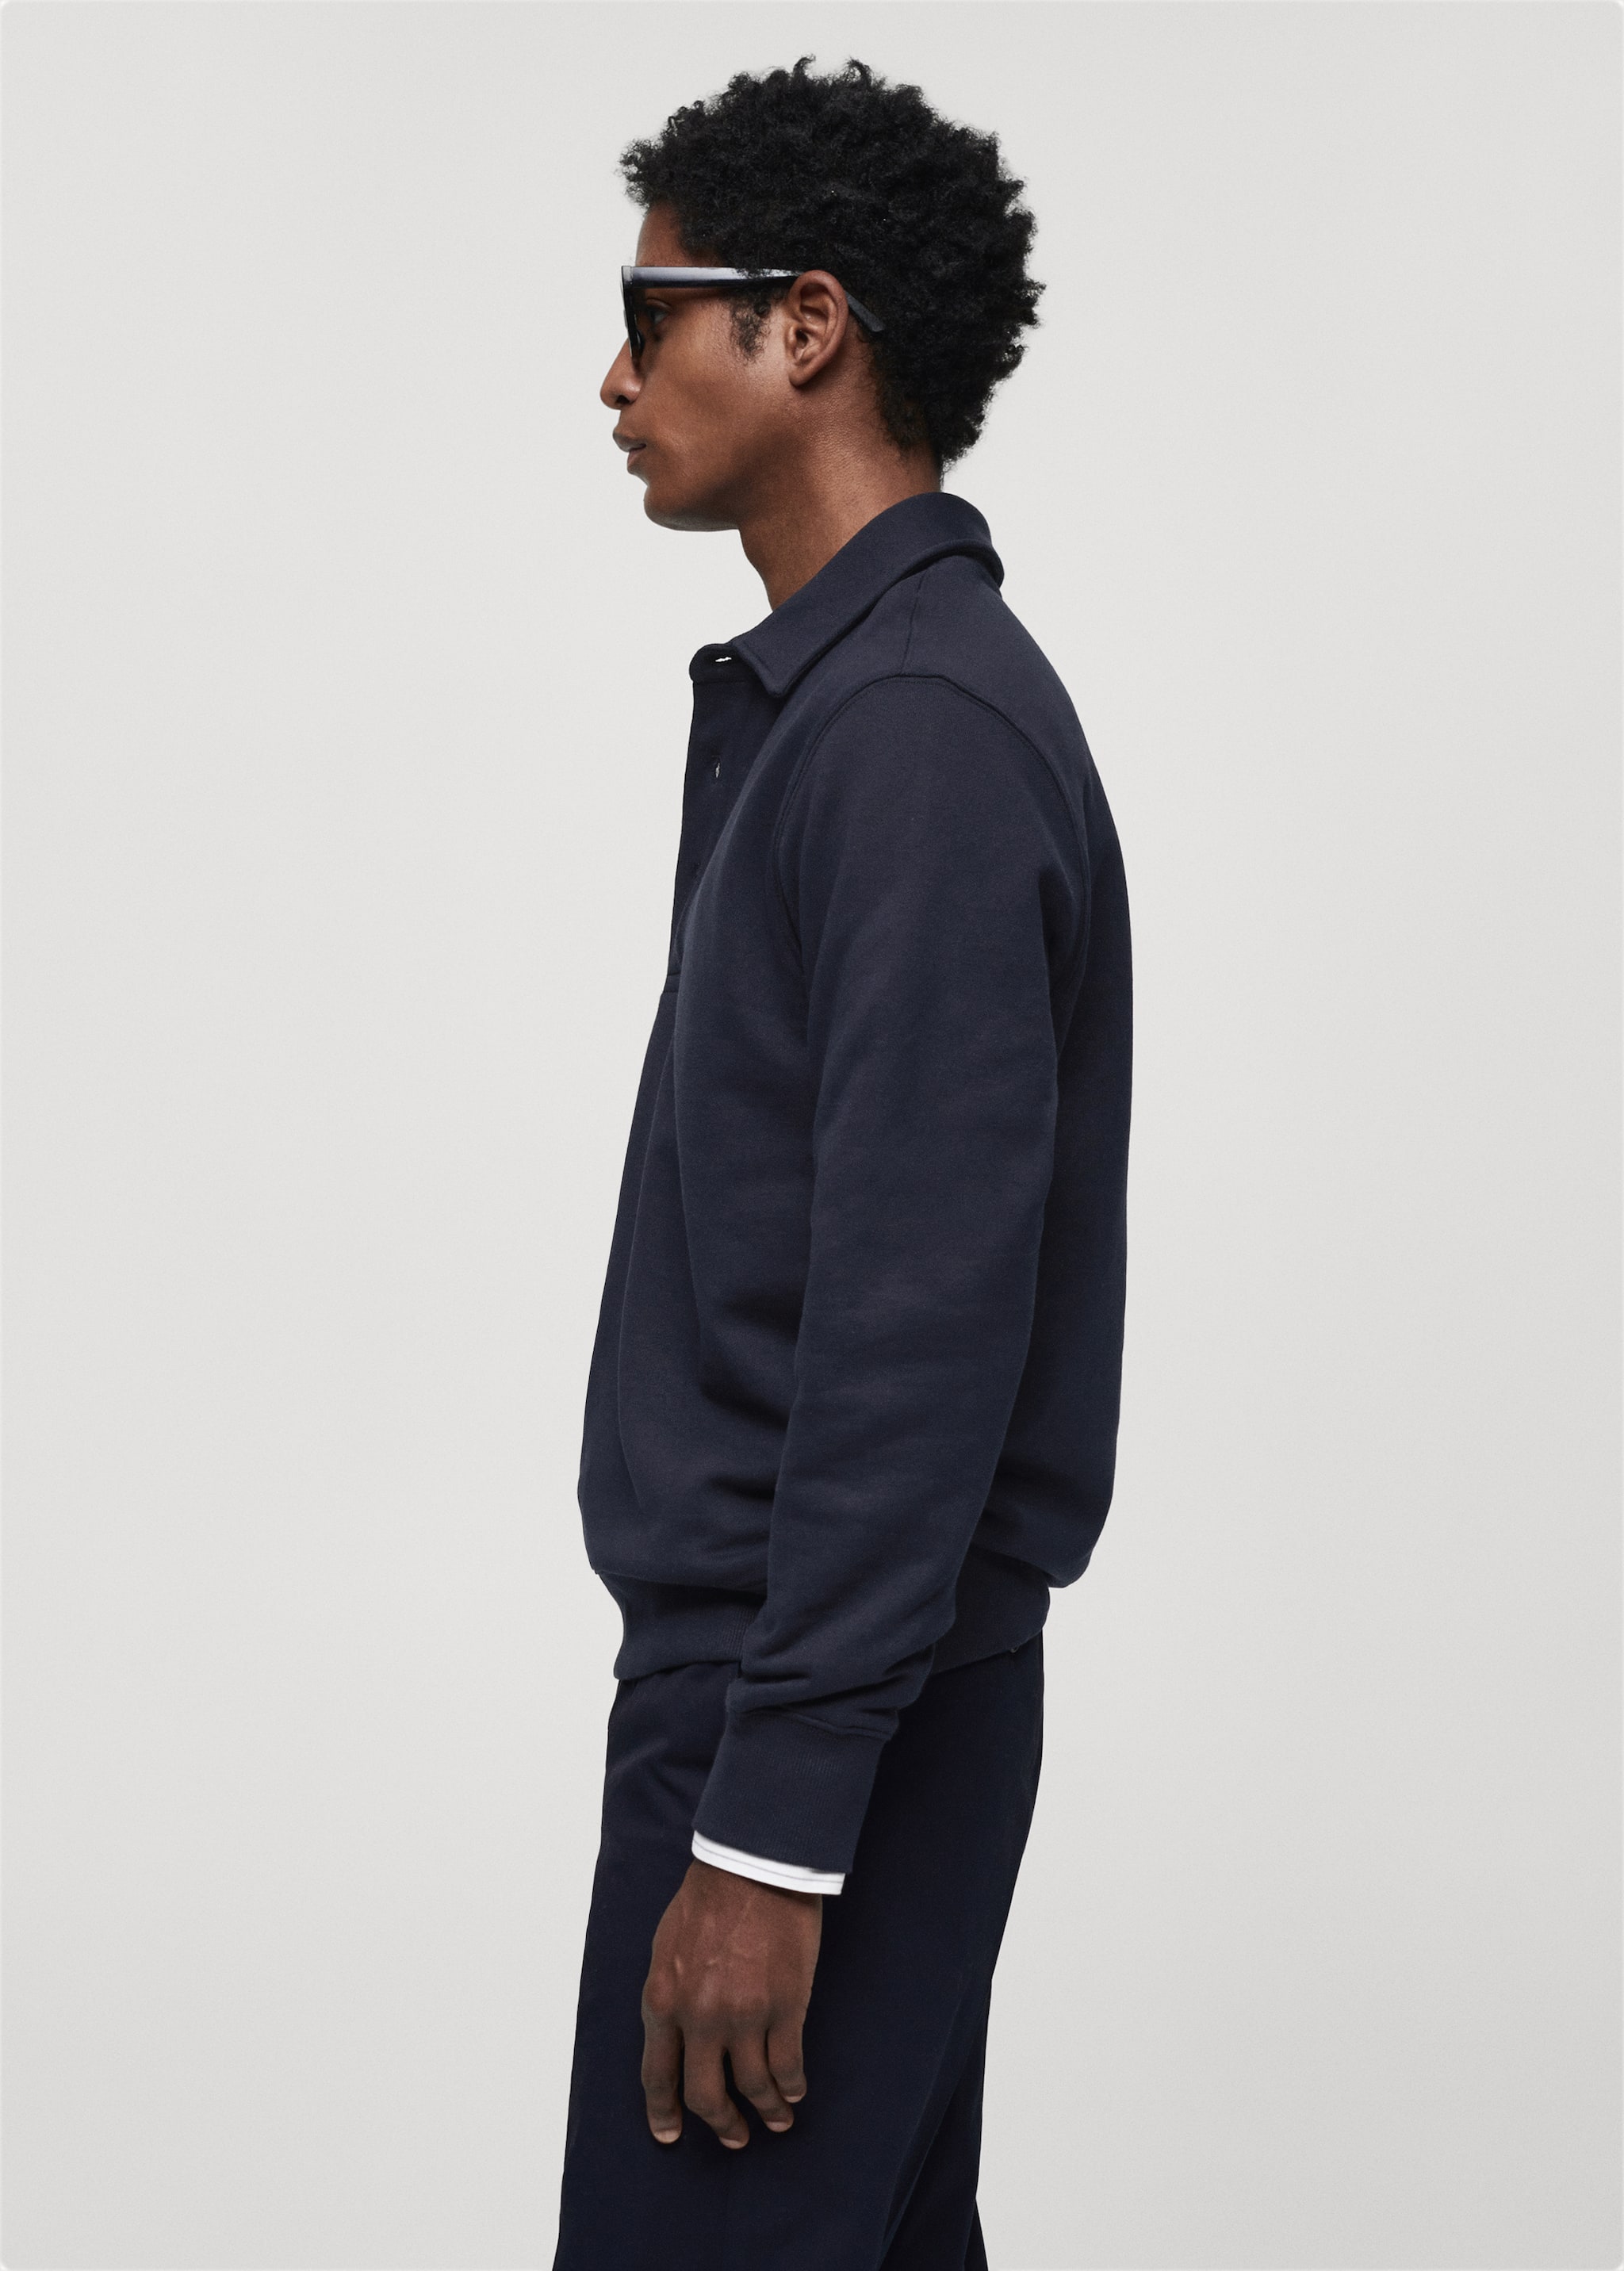 Cotton polo sweatshirt - Details of the article 2